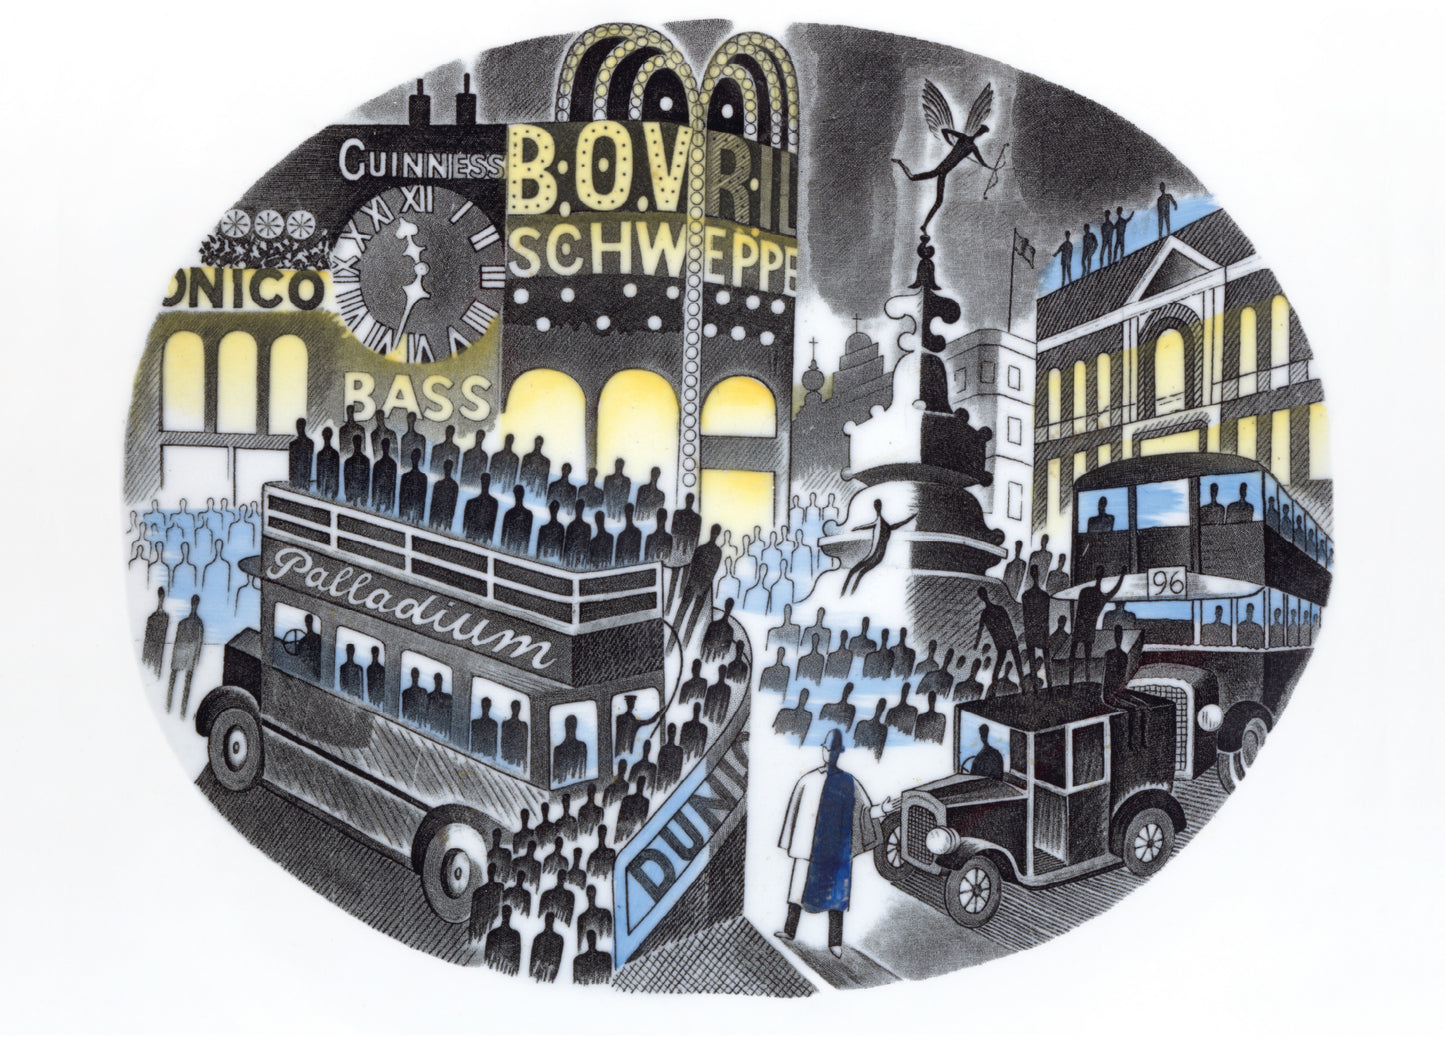 Piccadilly Circus - Greeting card